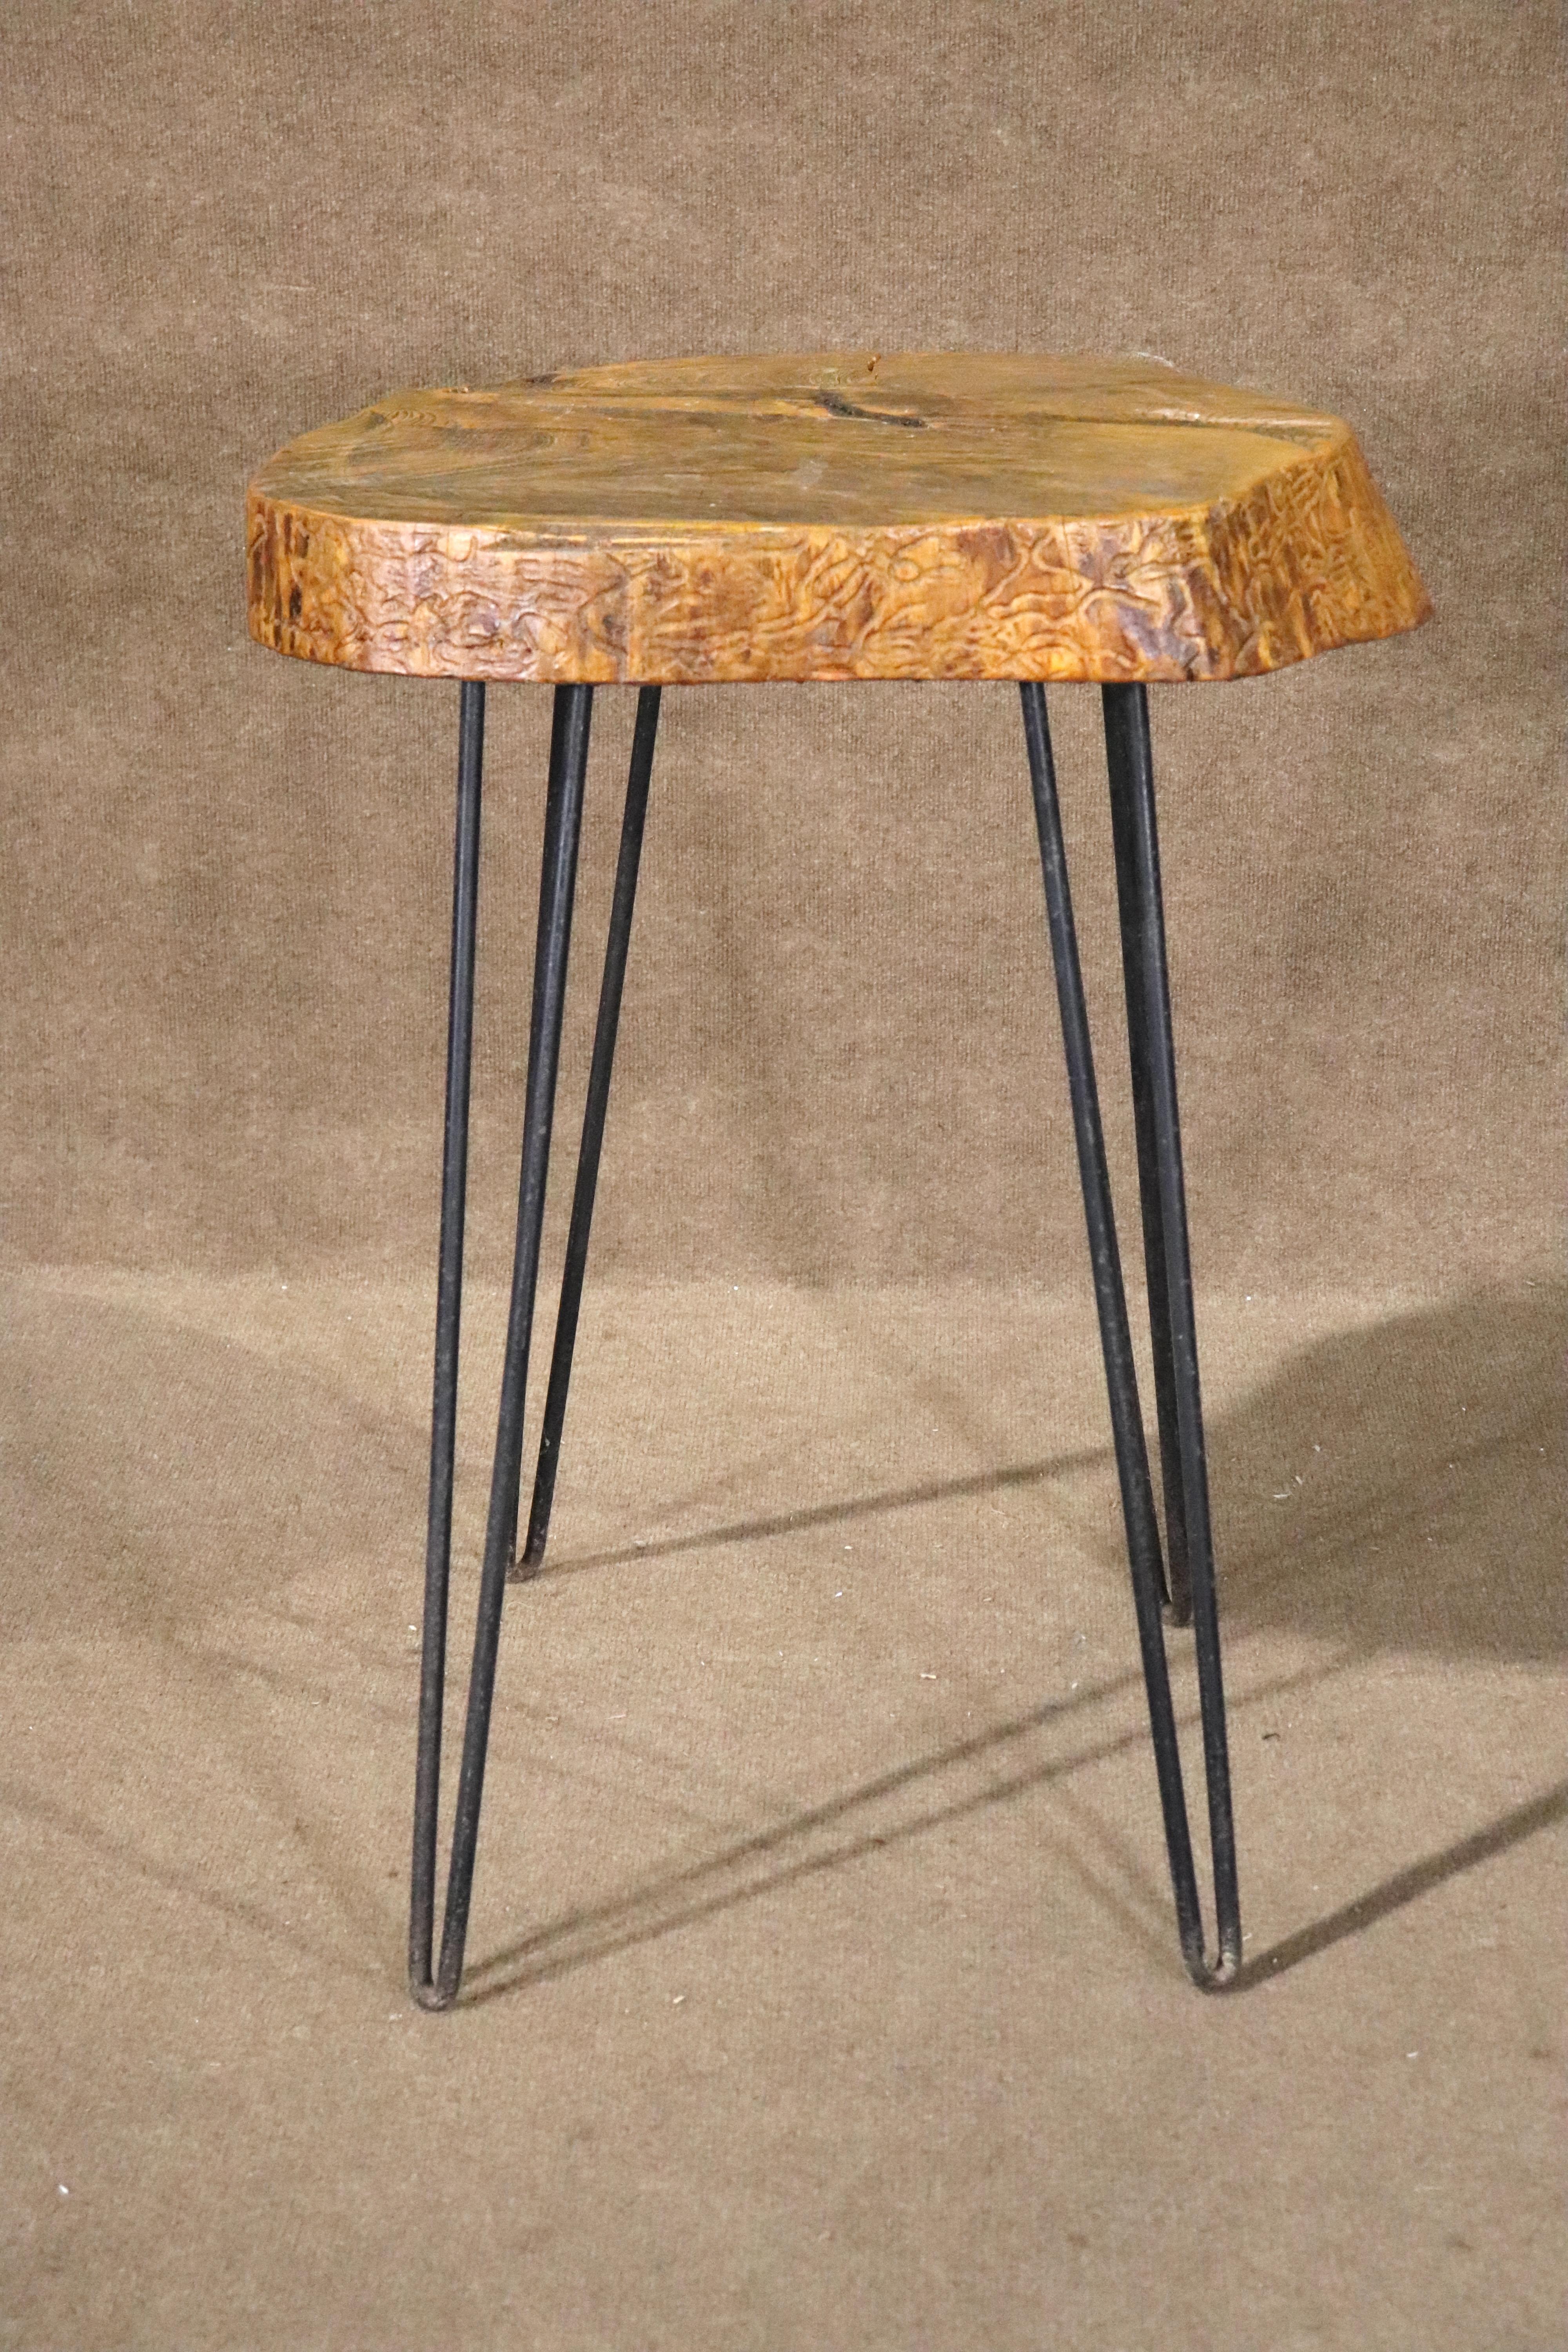 Rustic side table made of reclaimed wood top and iron hairpin legs. 
Please confirm location NY or NJ